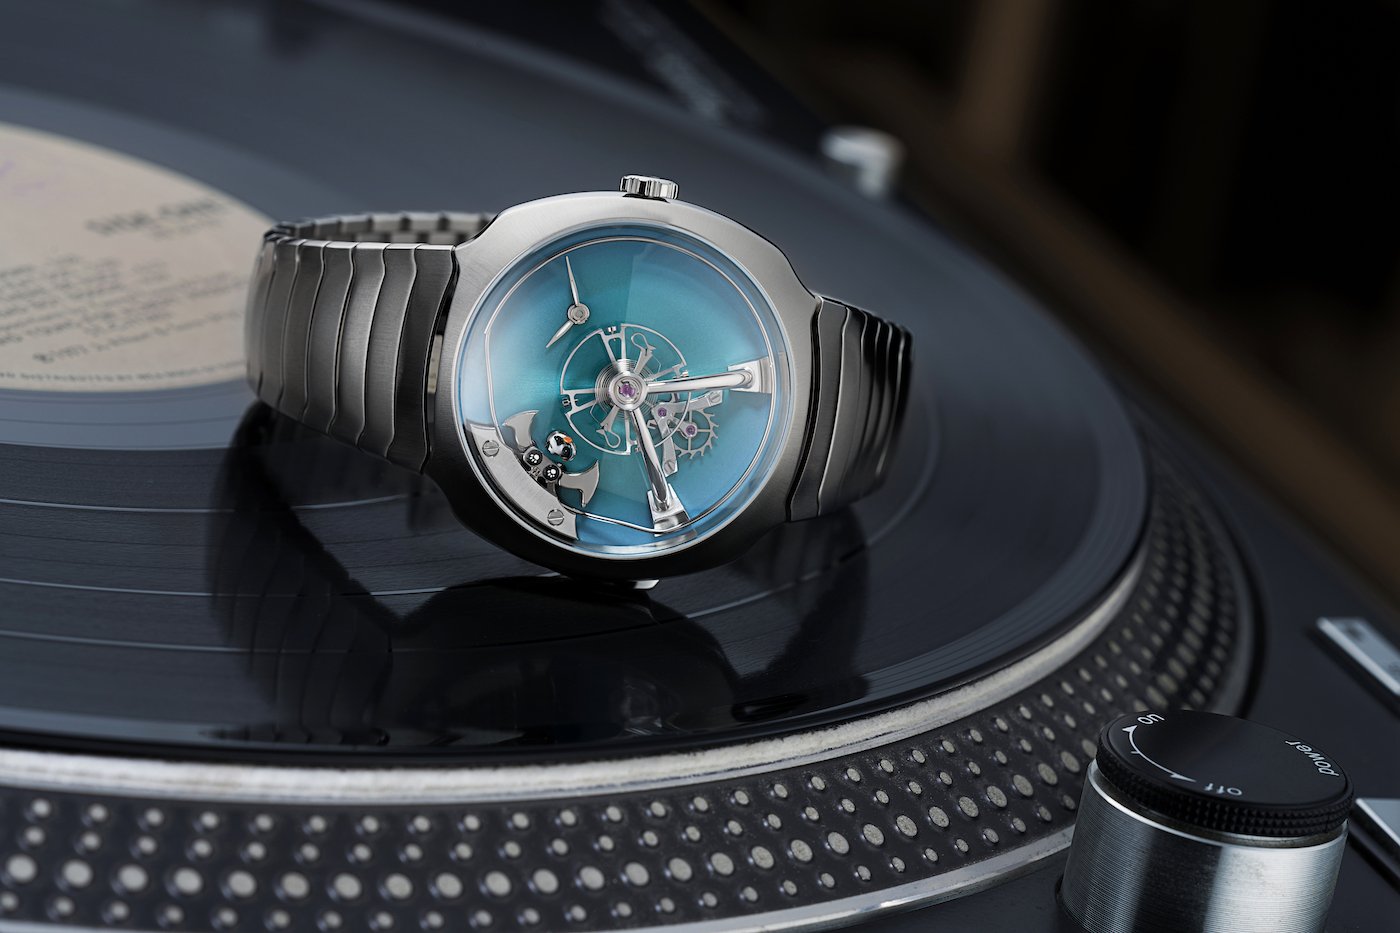 H. Moser & Cie. and MB&F join creative forces again for Only Watch